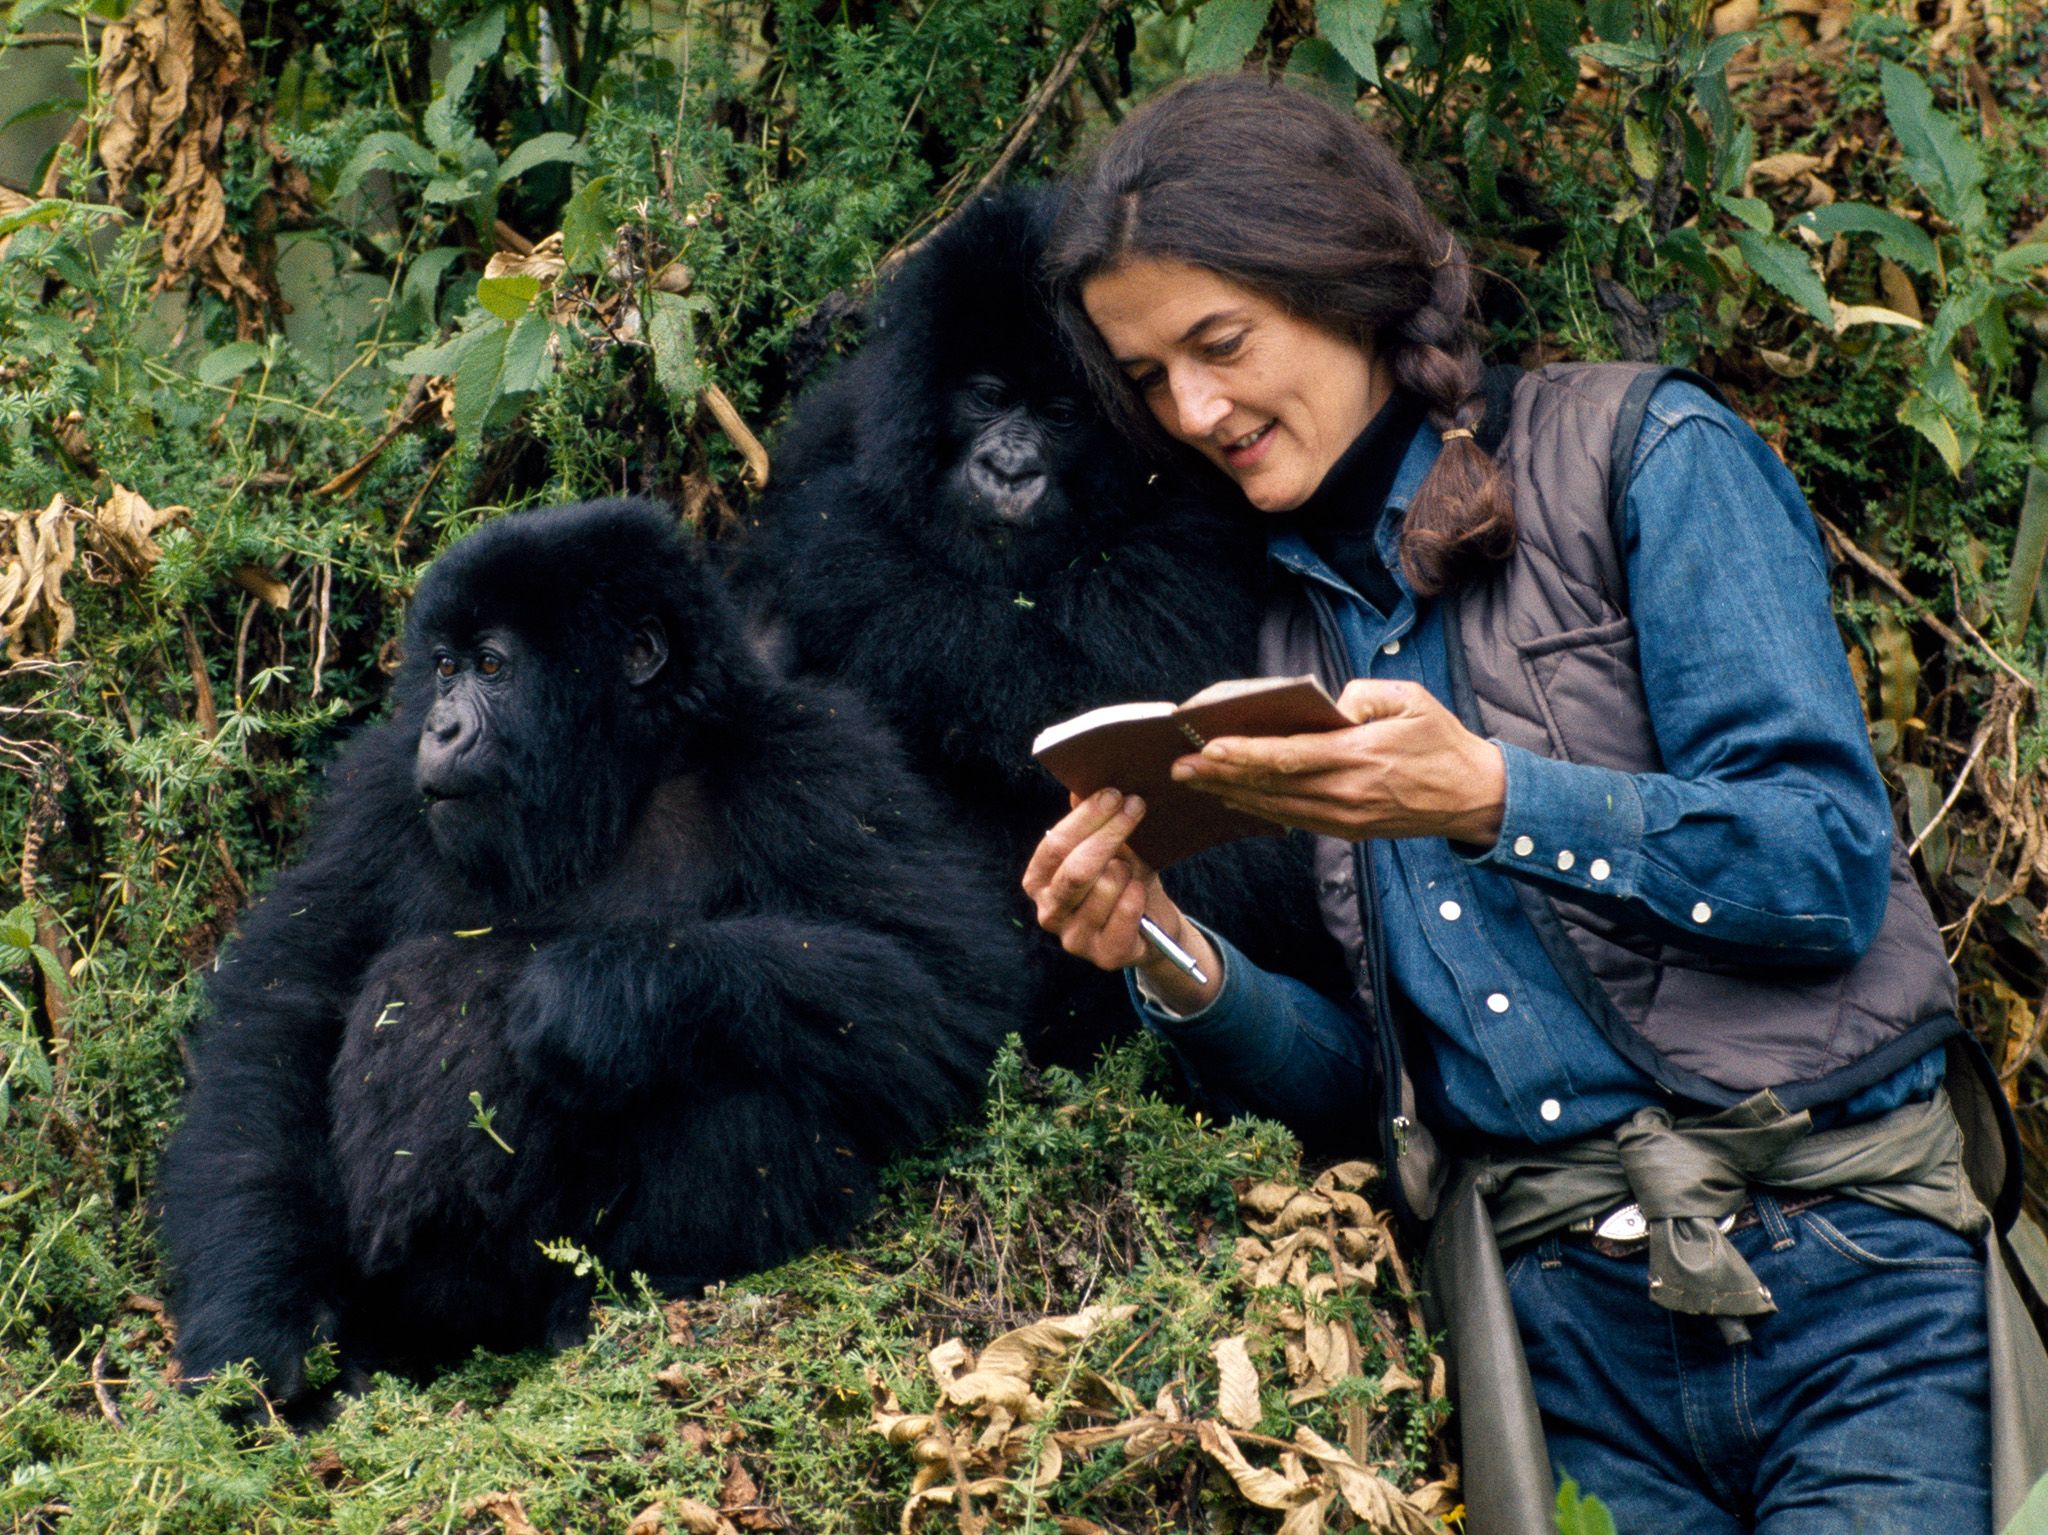 Dian Fossey in the wild with Mountain Gorillas. This image is from Dian Fossey: Secrets in the Mist. [Photo of the day - December 2017]